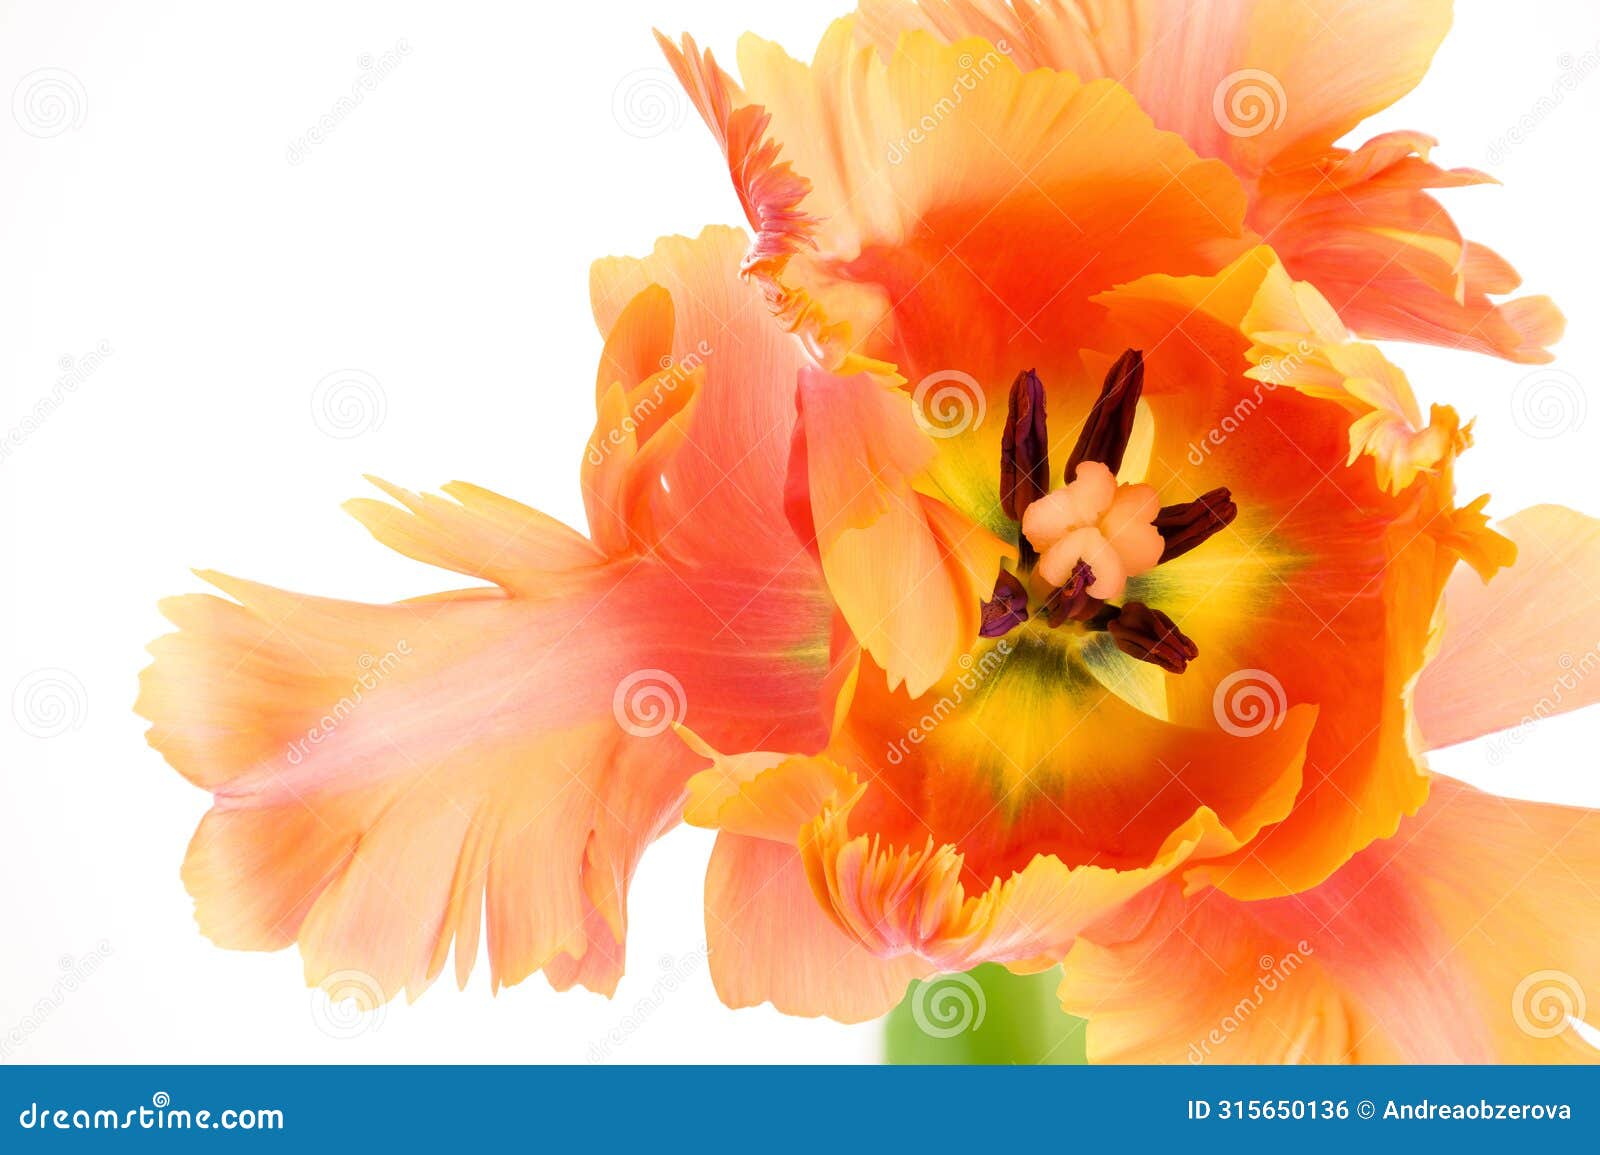 amazing parrot. parrot tulip open flower head  on white background. specialty tulip. macro.